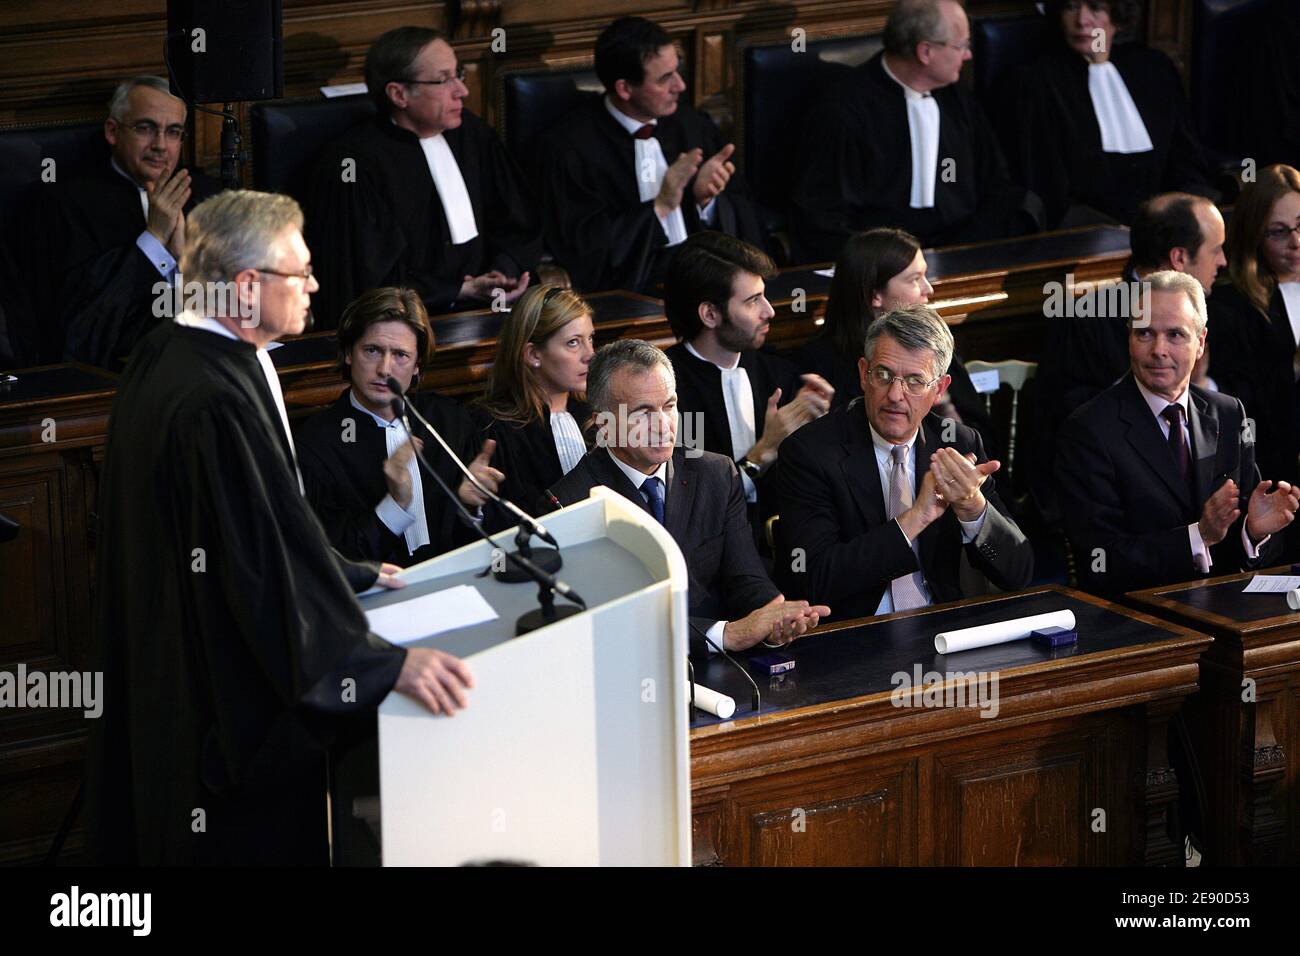 Family court president Jean-Claude Magendie, Public prosecutor Laurent Le Mesle, Prosecuting attorney Jean-Claude Marin attend the Offcial lawyers rentry at the court hall in Paris, France on December 1st, 2007. Photo by Thierry Orban/ABACAPRESS.COM Stock Photo